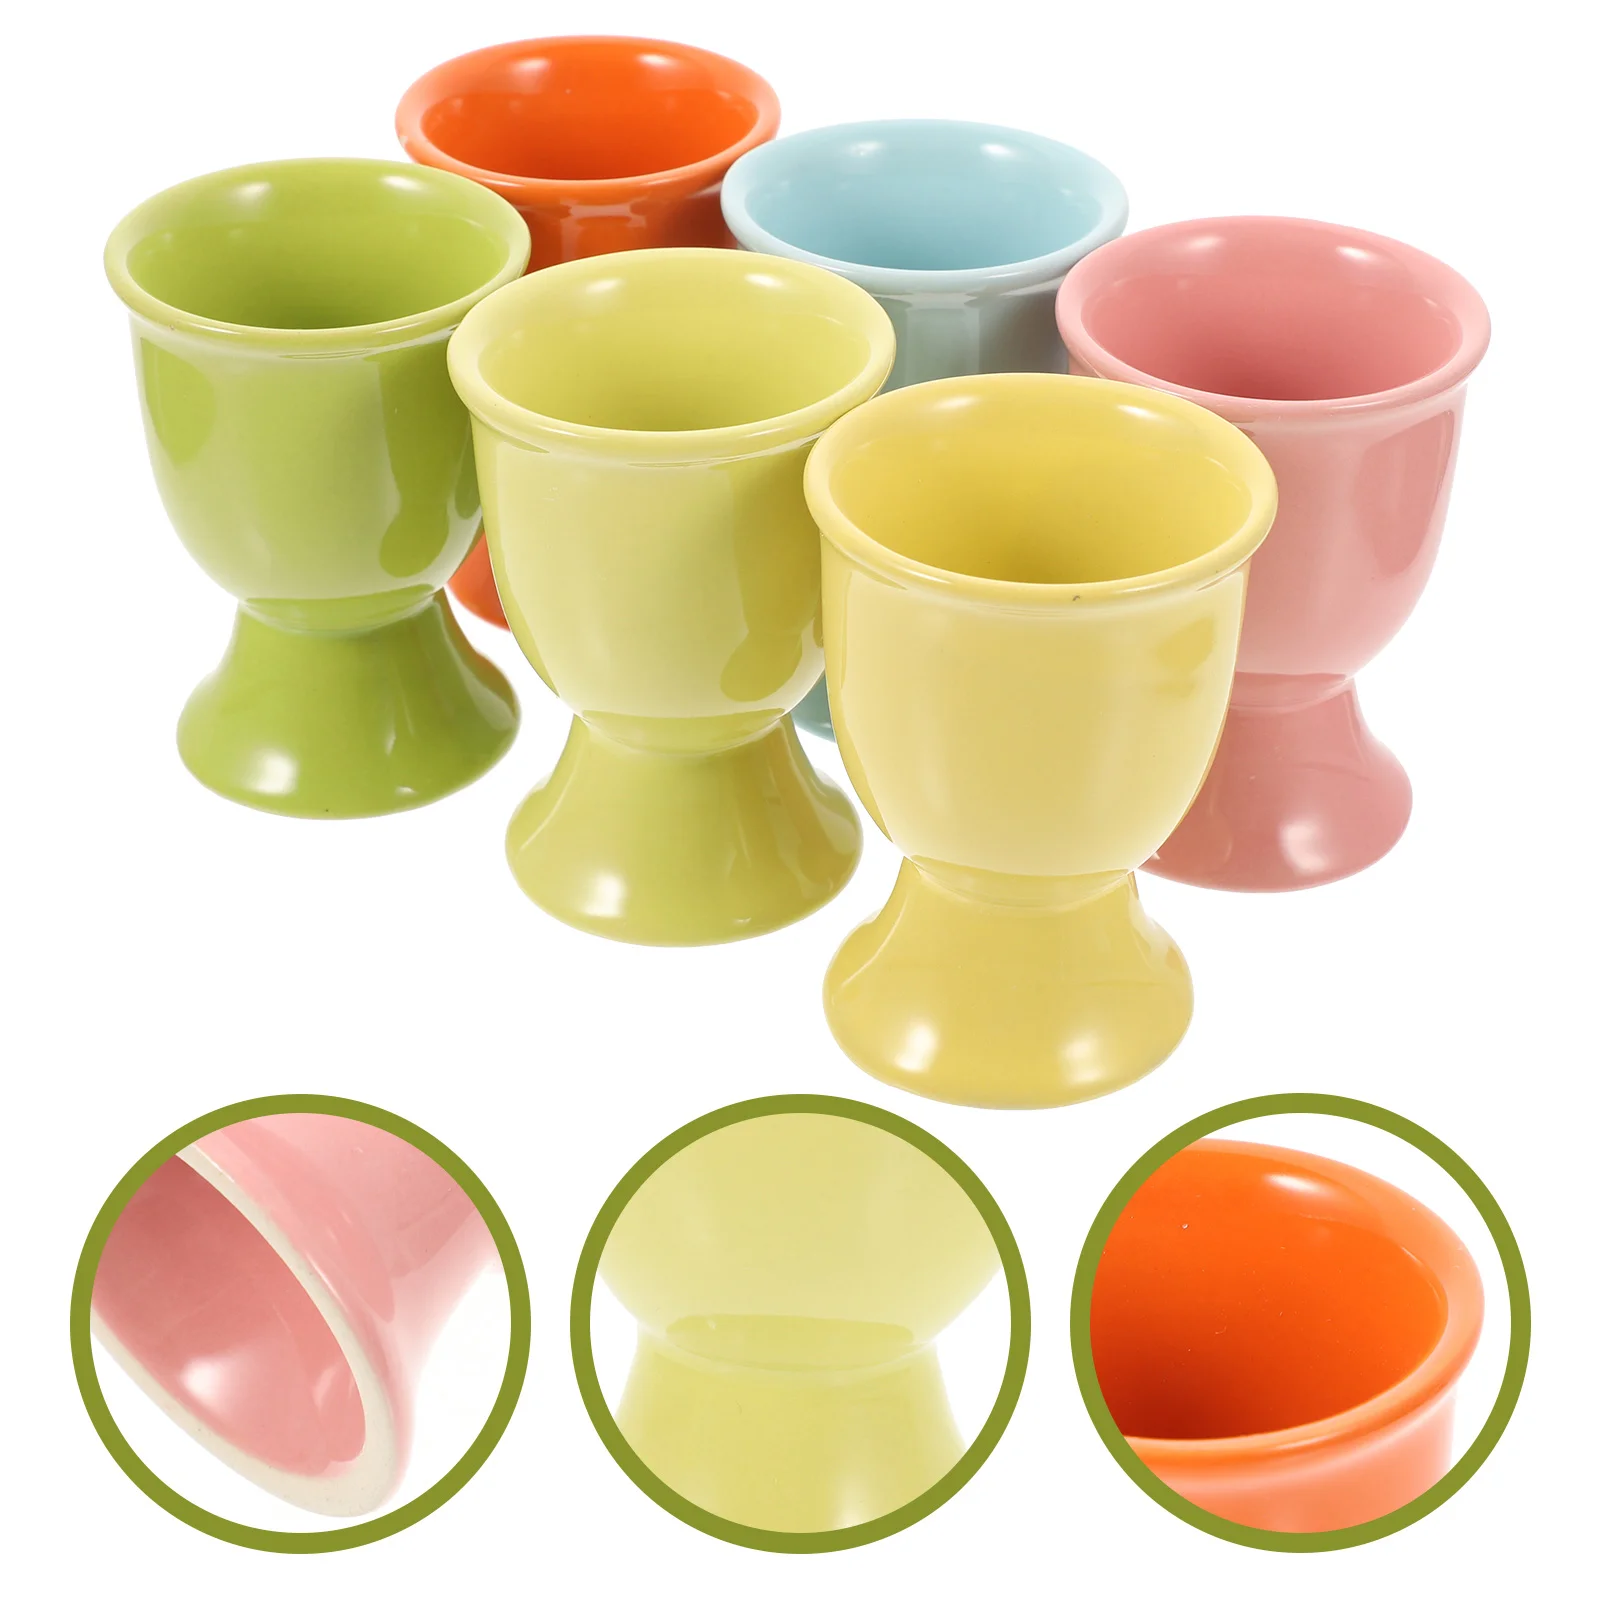 

Egg Holder Cup Boiled Cups Ceramic Stand Breakfast Storage Easter Eggs Poacher Soft Hard Tool Dish Cooker Sauce Tray Serving